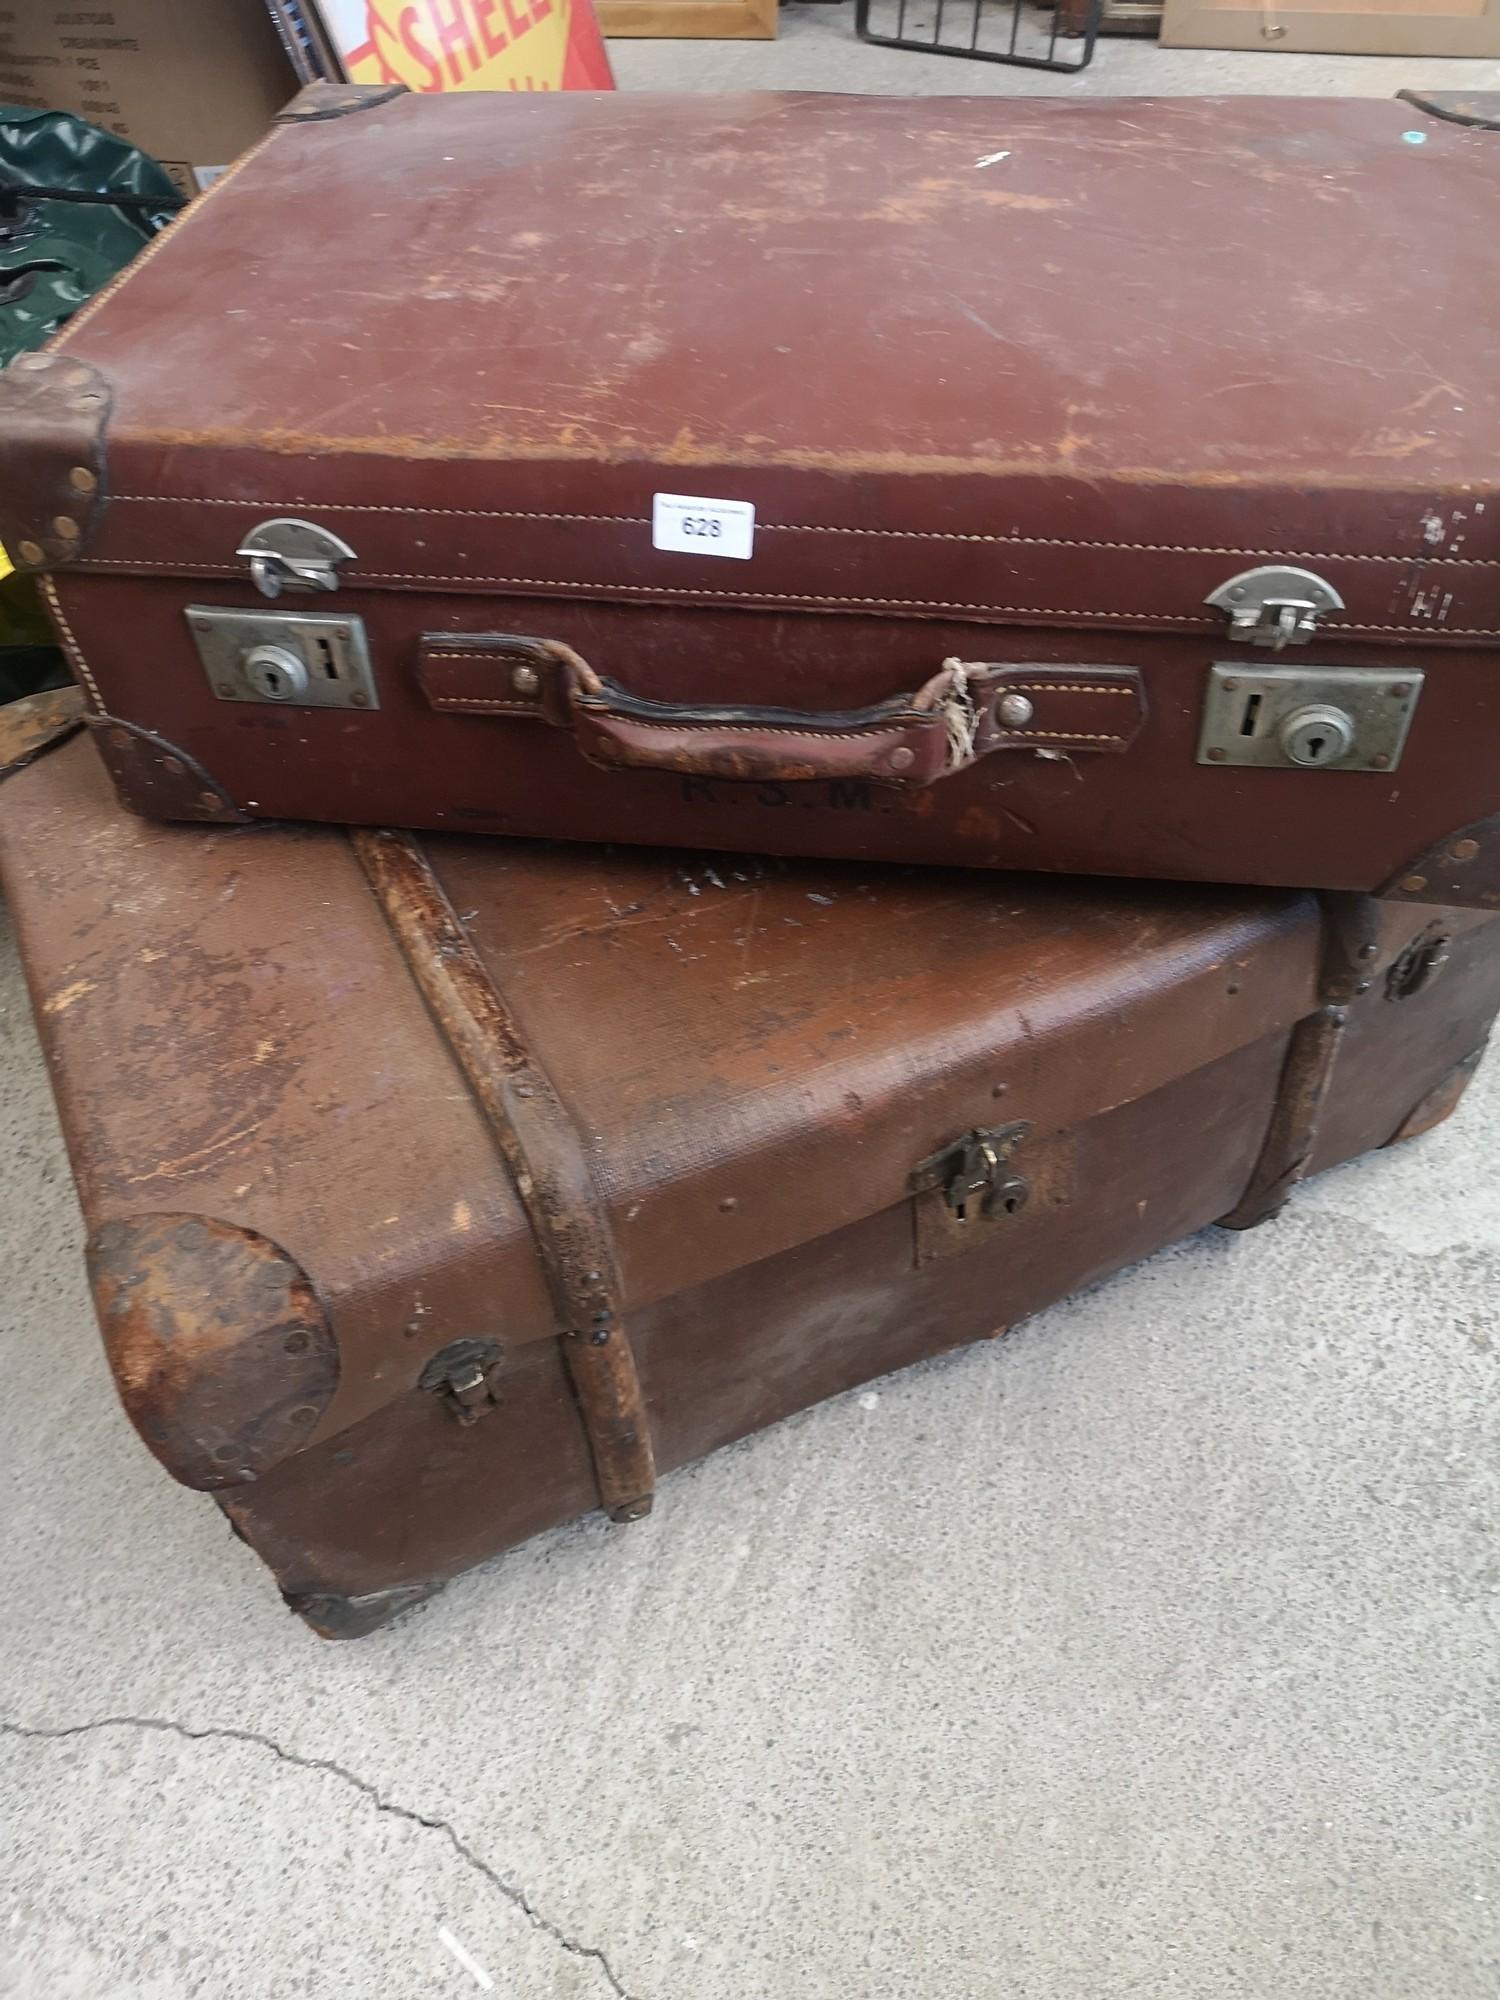 Vintage travel trunk with wooden bounding together with leather travel case.